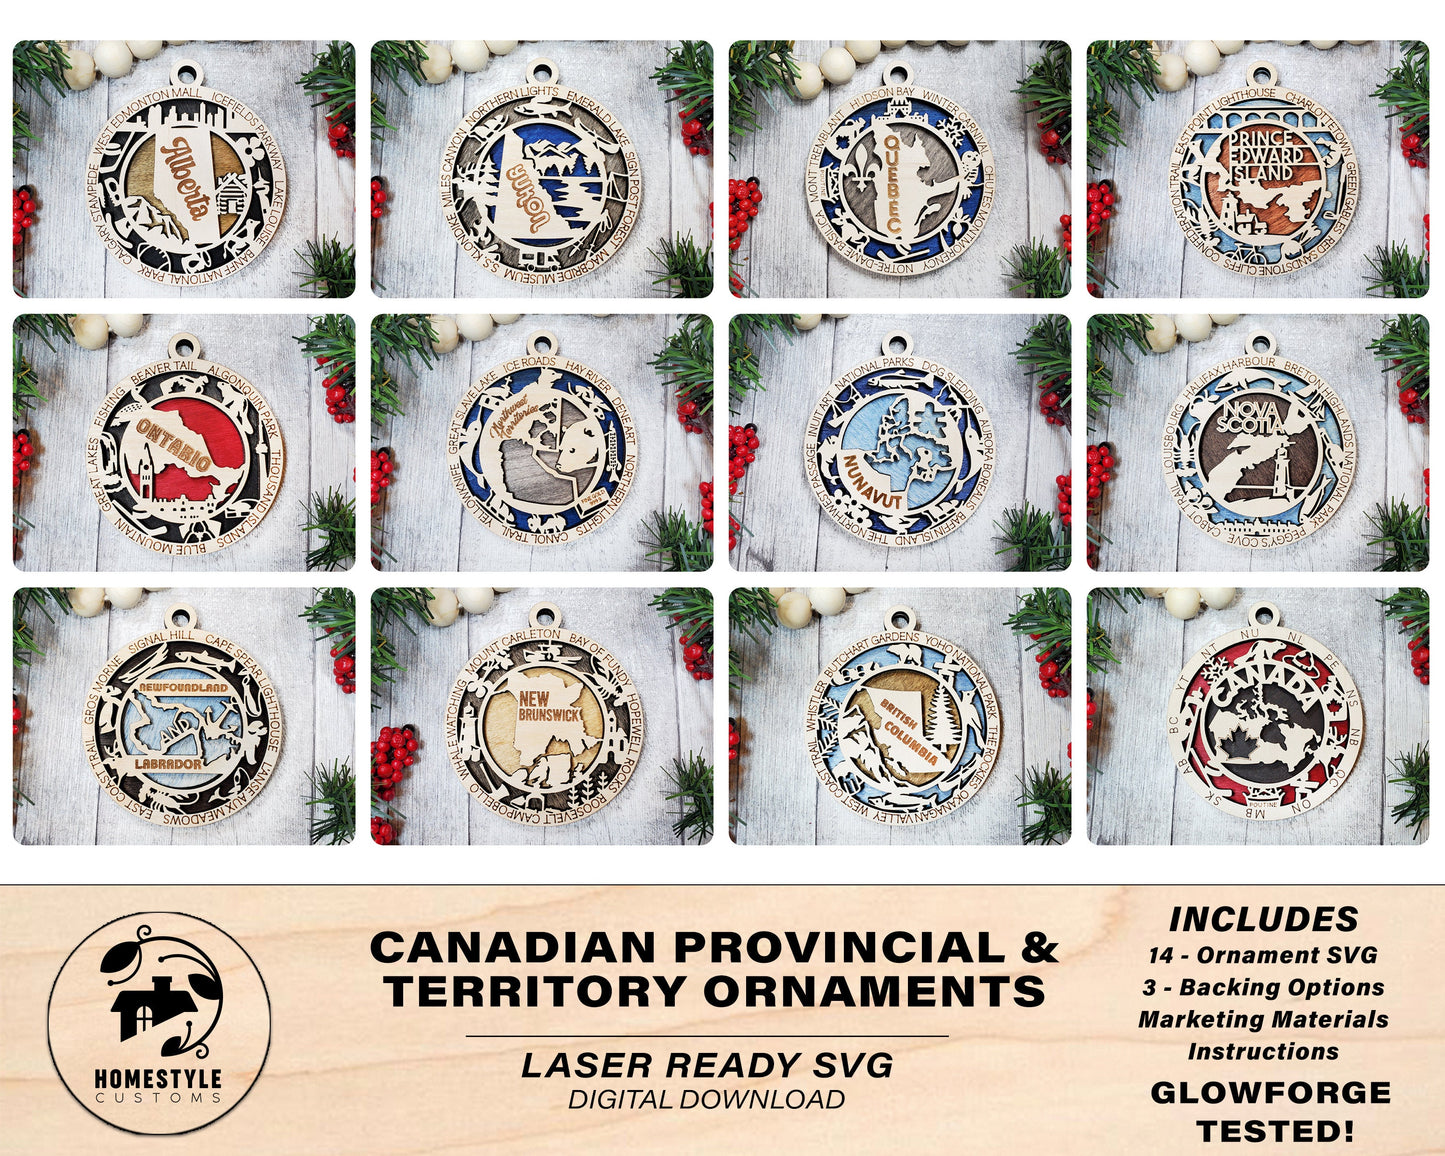 Canadian Provincial Ornament Bundle - 14 Unique designs for each province, Territory & Country - SVG File Download - Sized for Glowforge